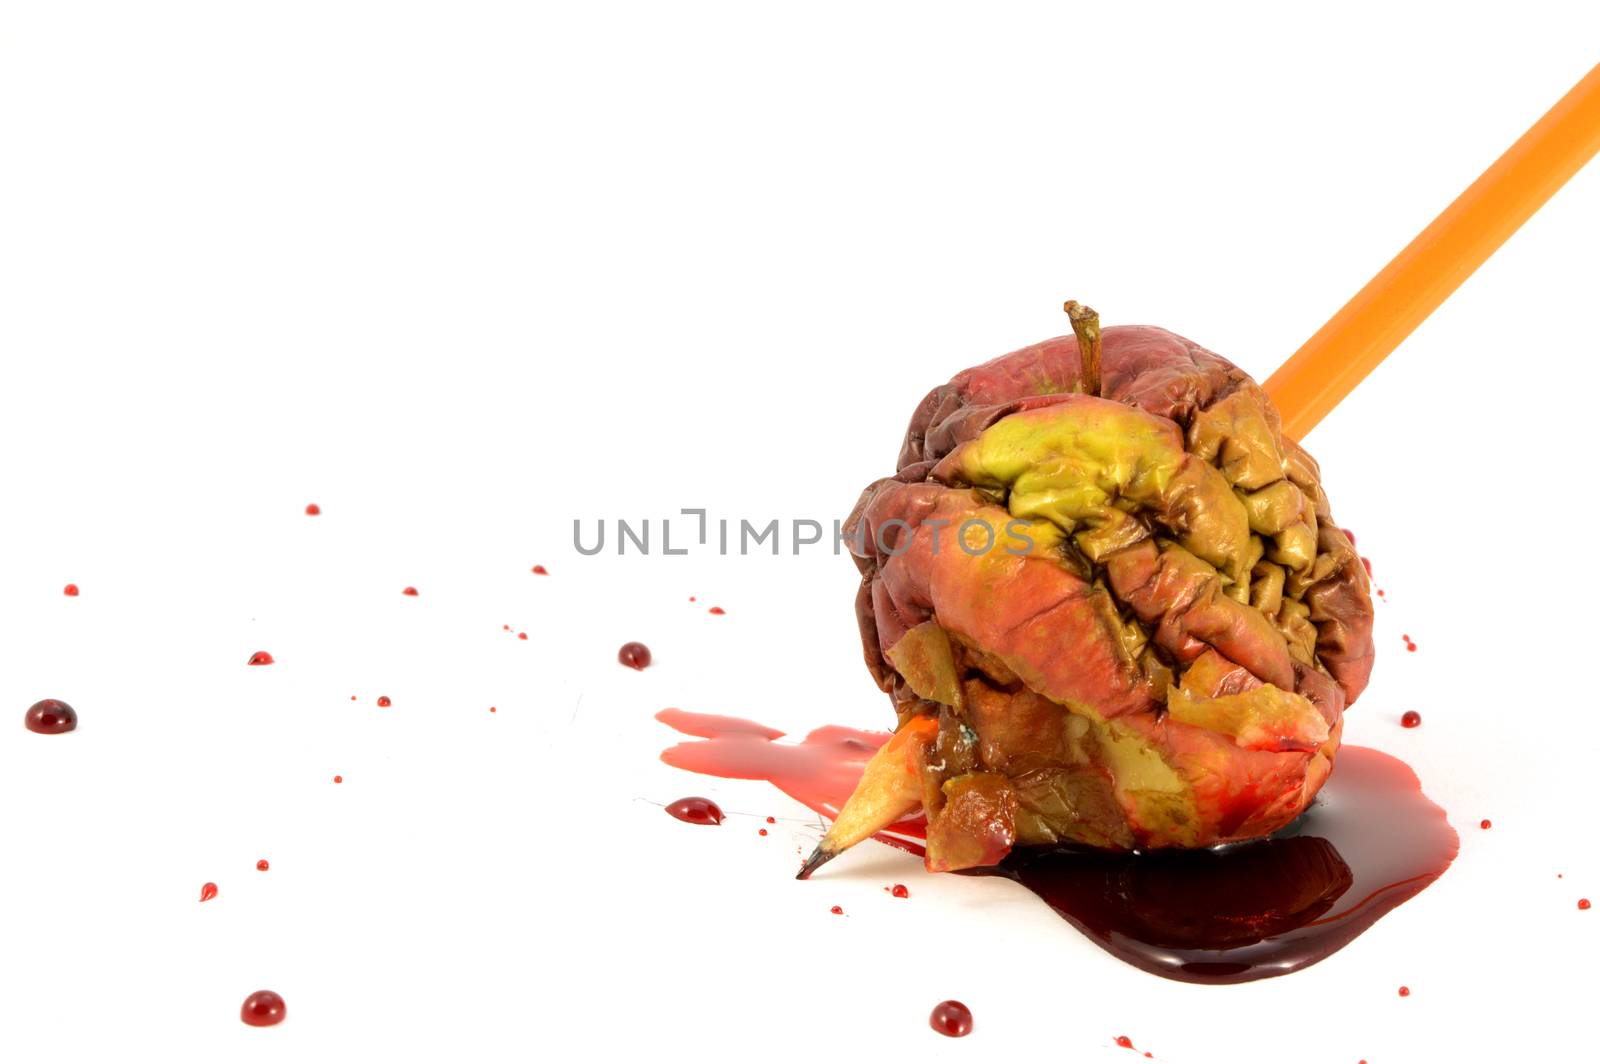 A closeup view of one bad apple being stabbed by a pencil with blood spilling.